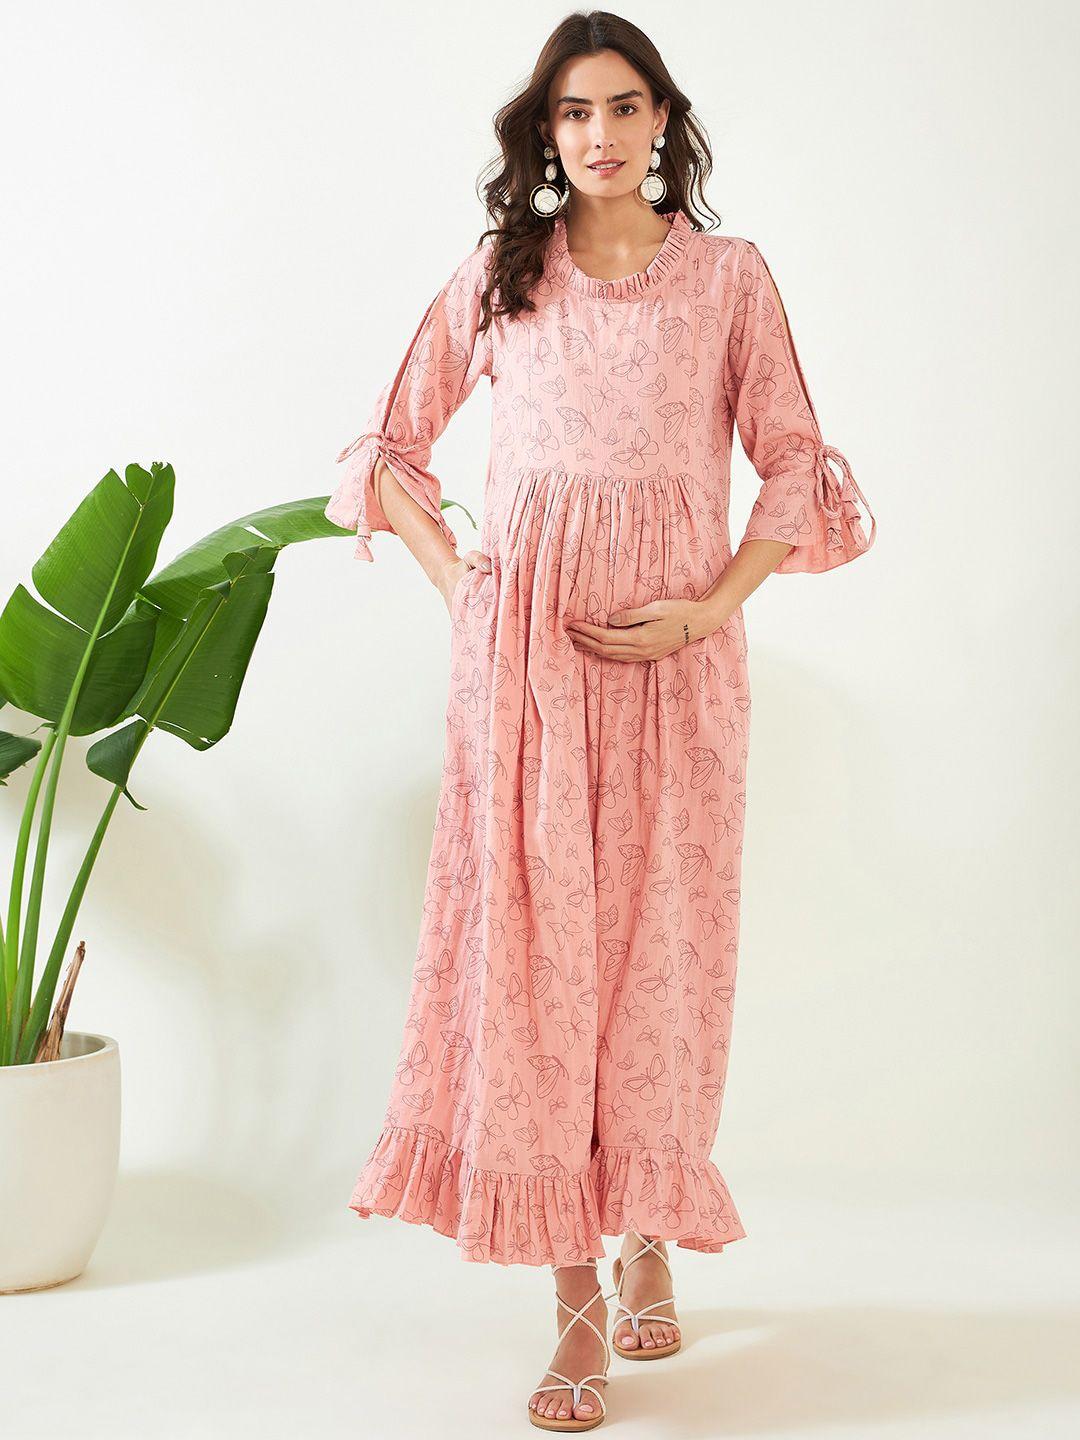 the-kaftan-company-graphic-printed-cotton-bell-sleeves-maternity-maxi-dress